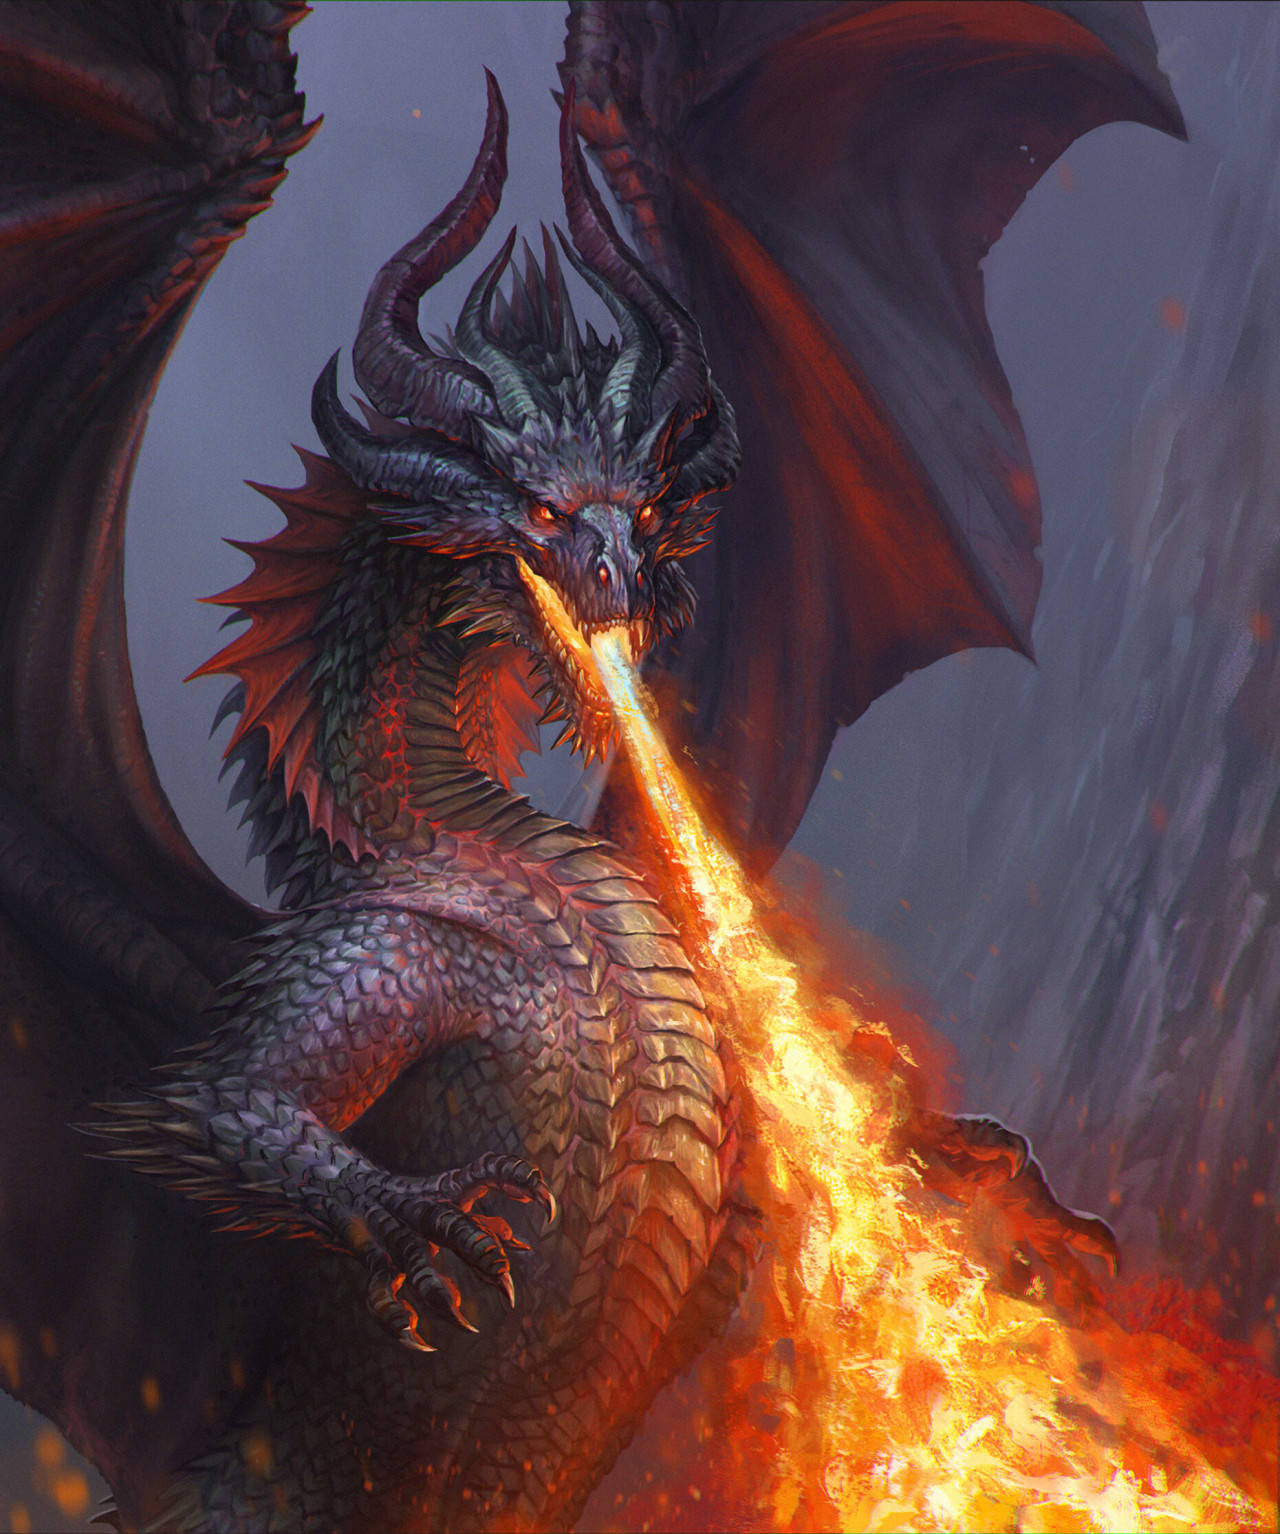 Ice And Fire Dragons
 Wallpapers